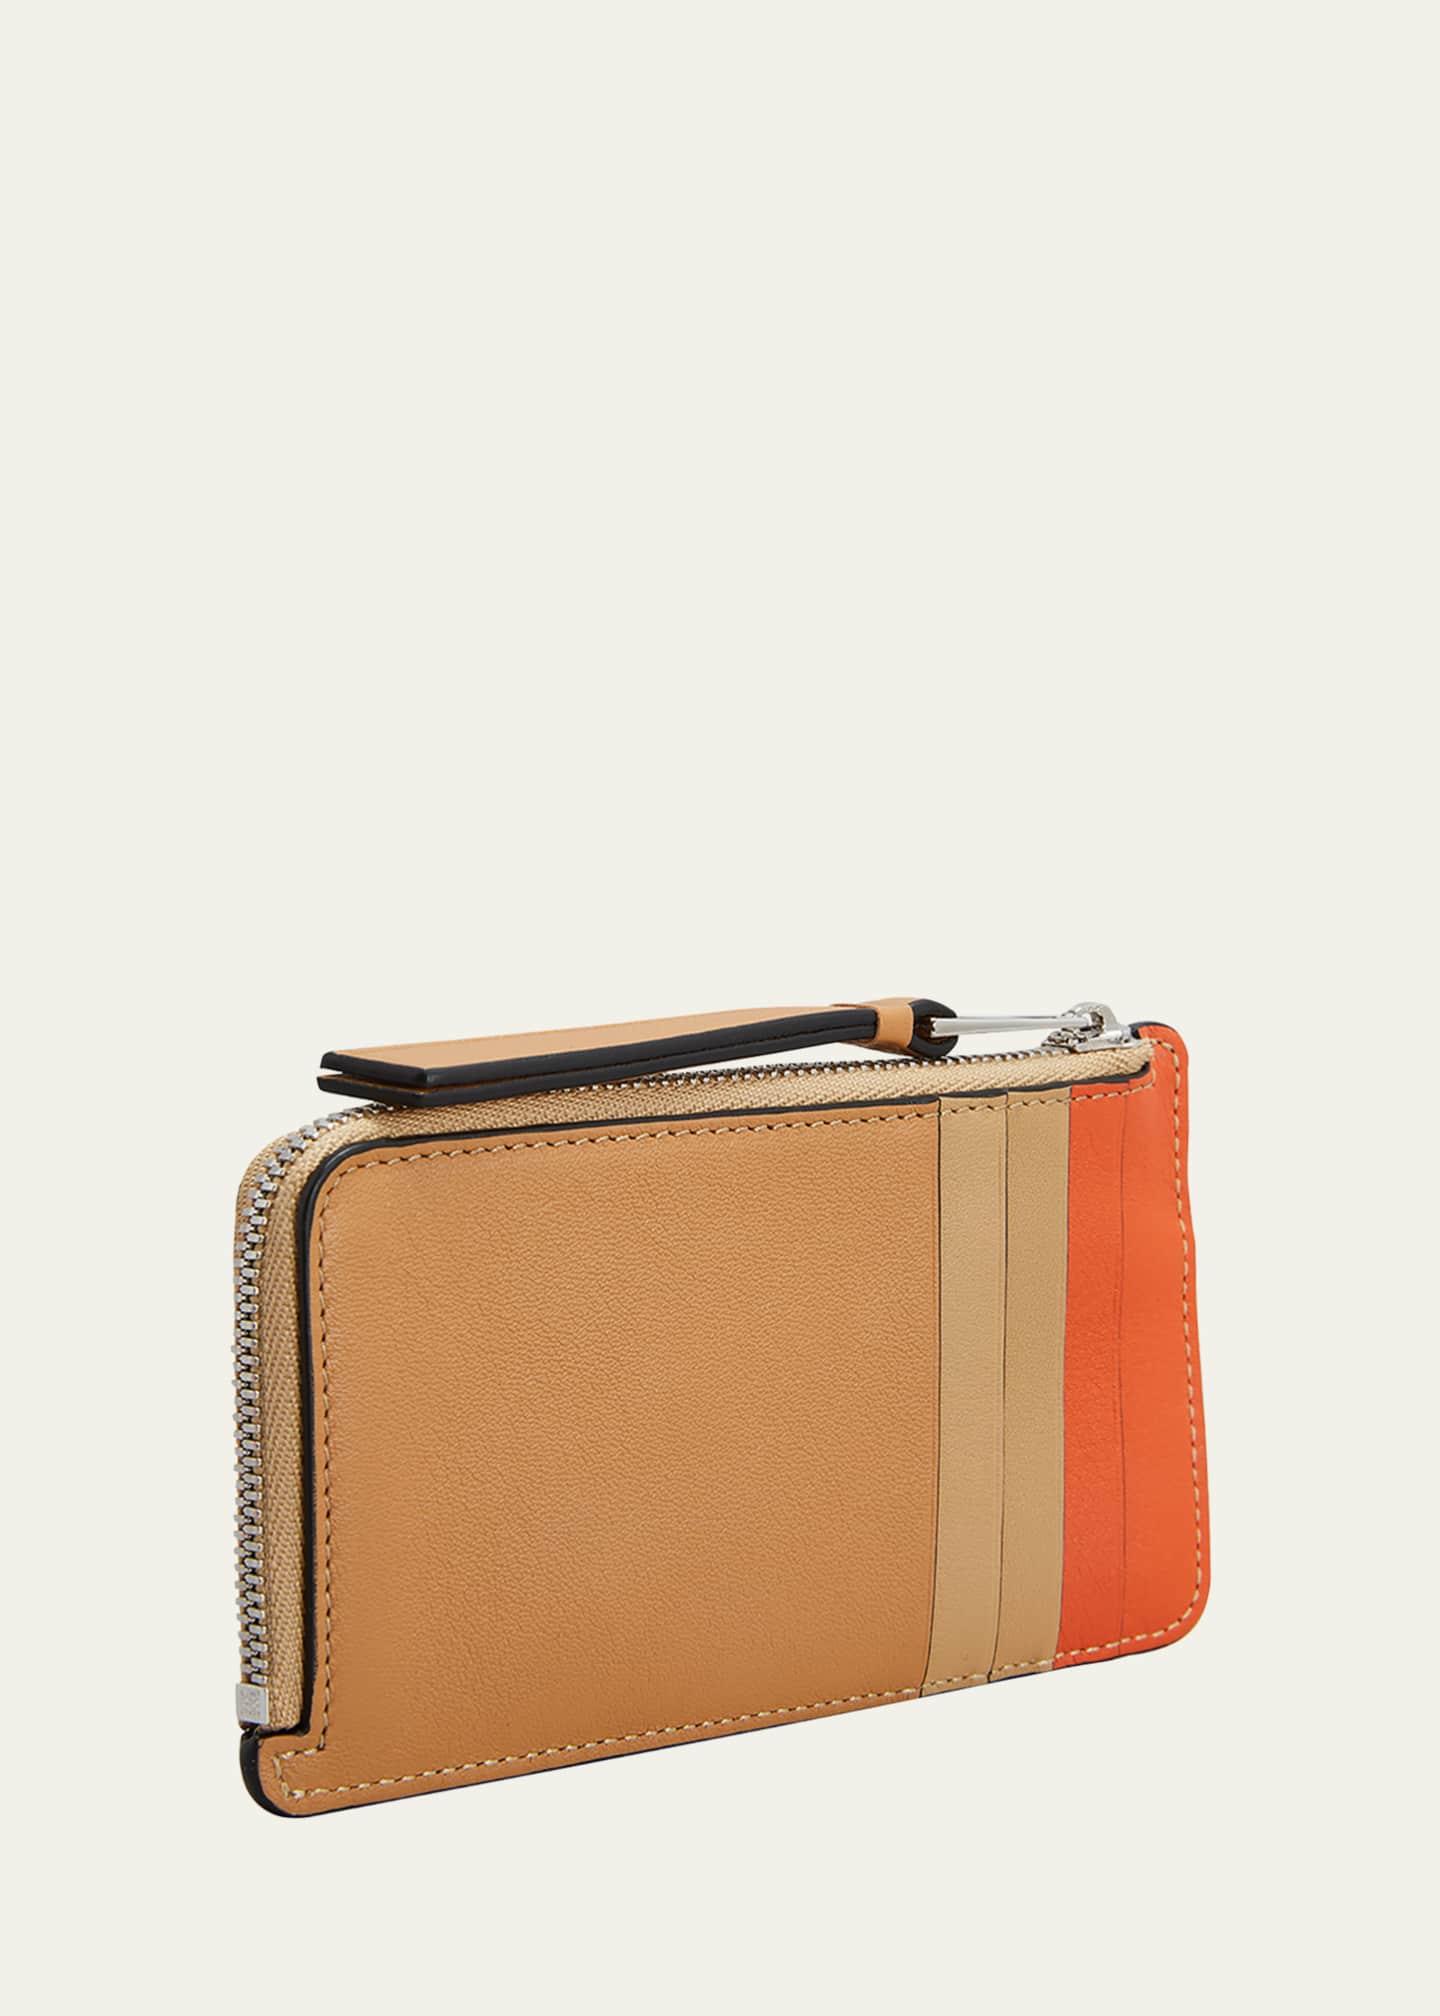 Loewe Leather Coin Card Holder